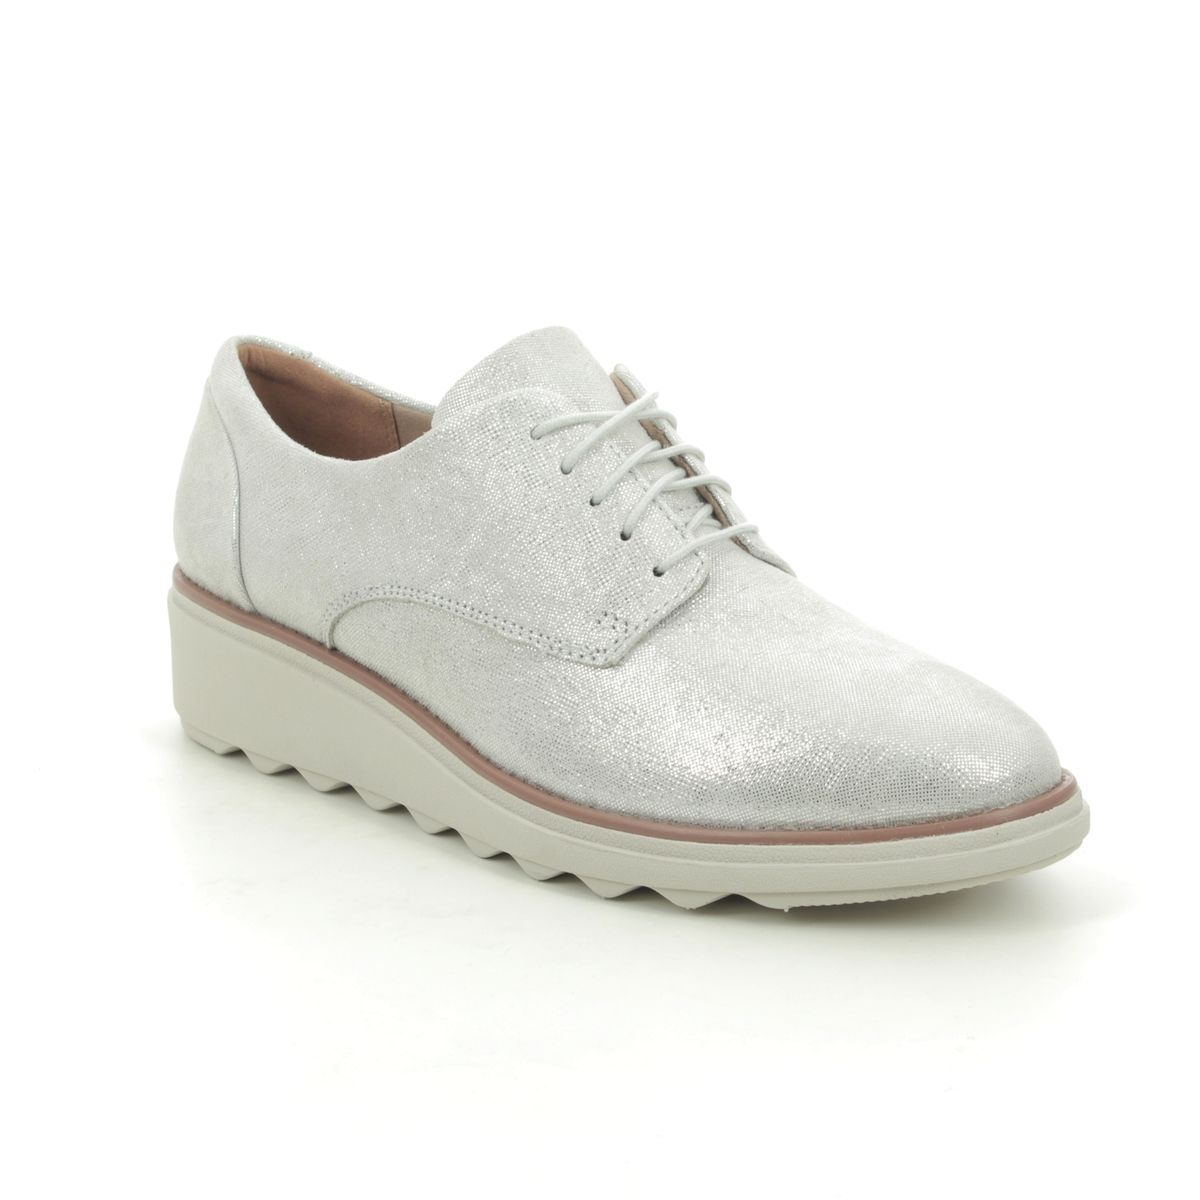 Clarks Sharon Noel D Fit Silver lacing shoes